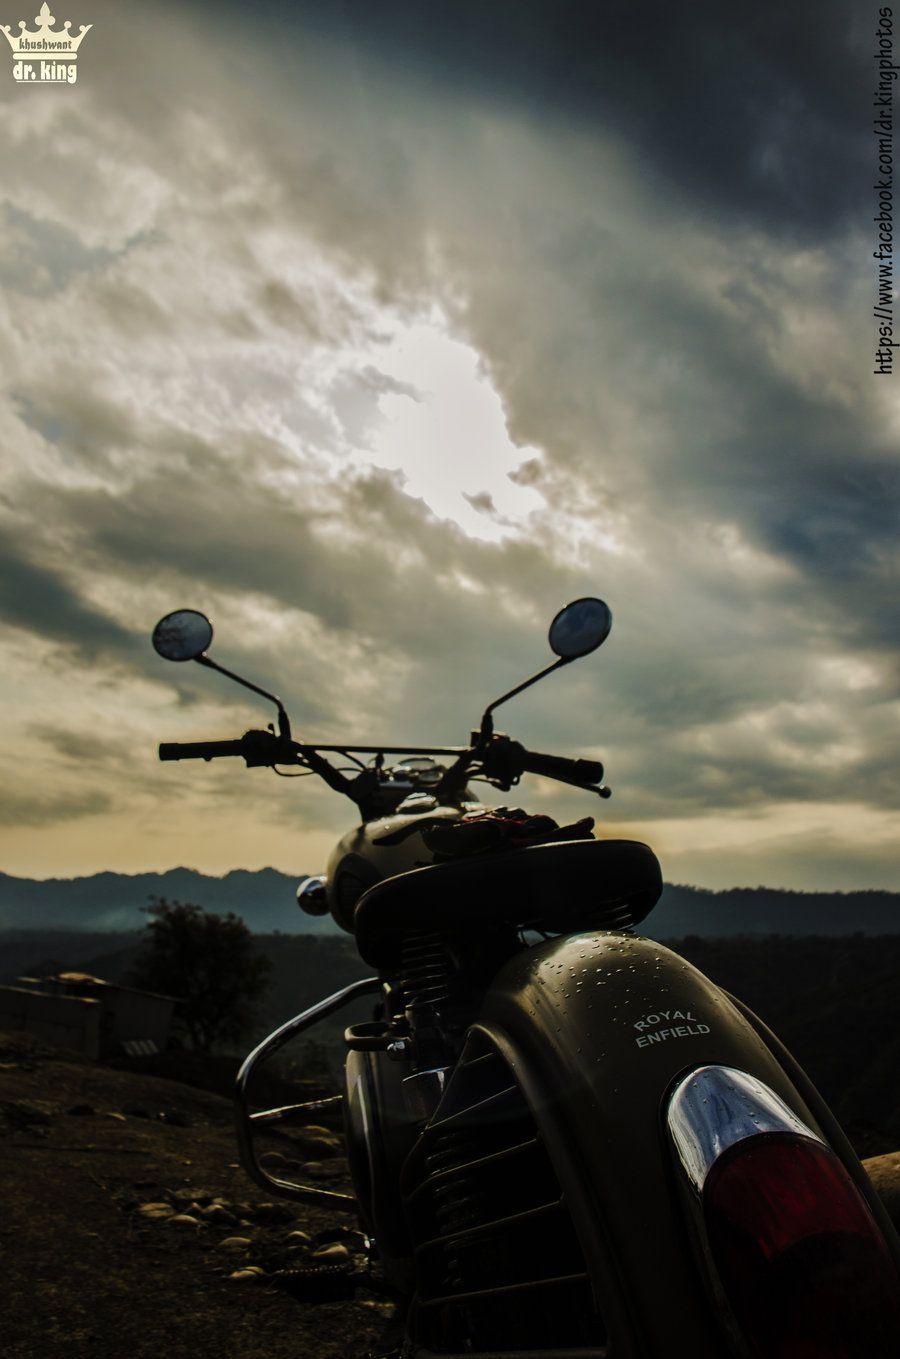 Royal Enfield Hd Wallpapers For Mobile Phone